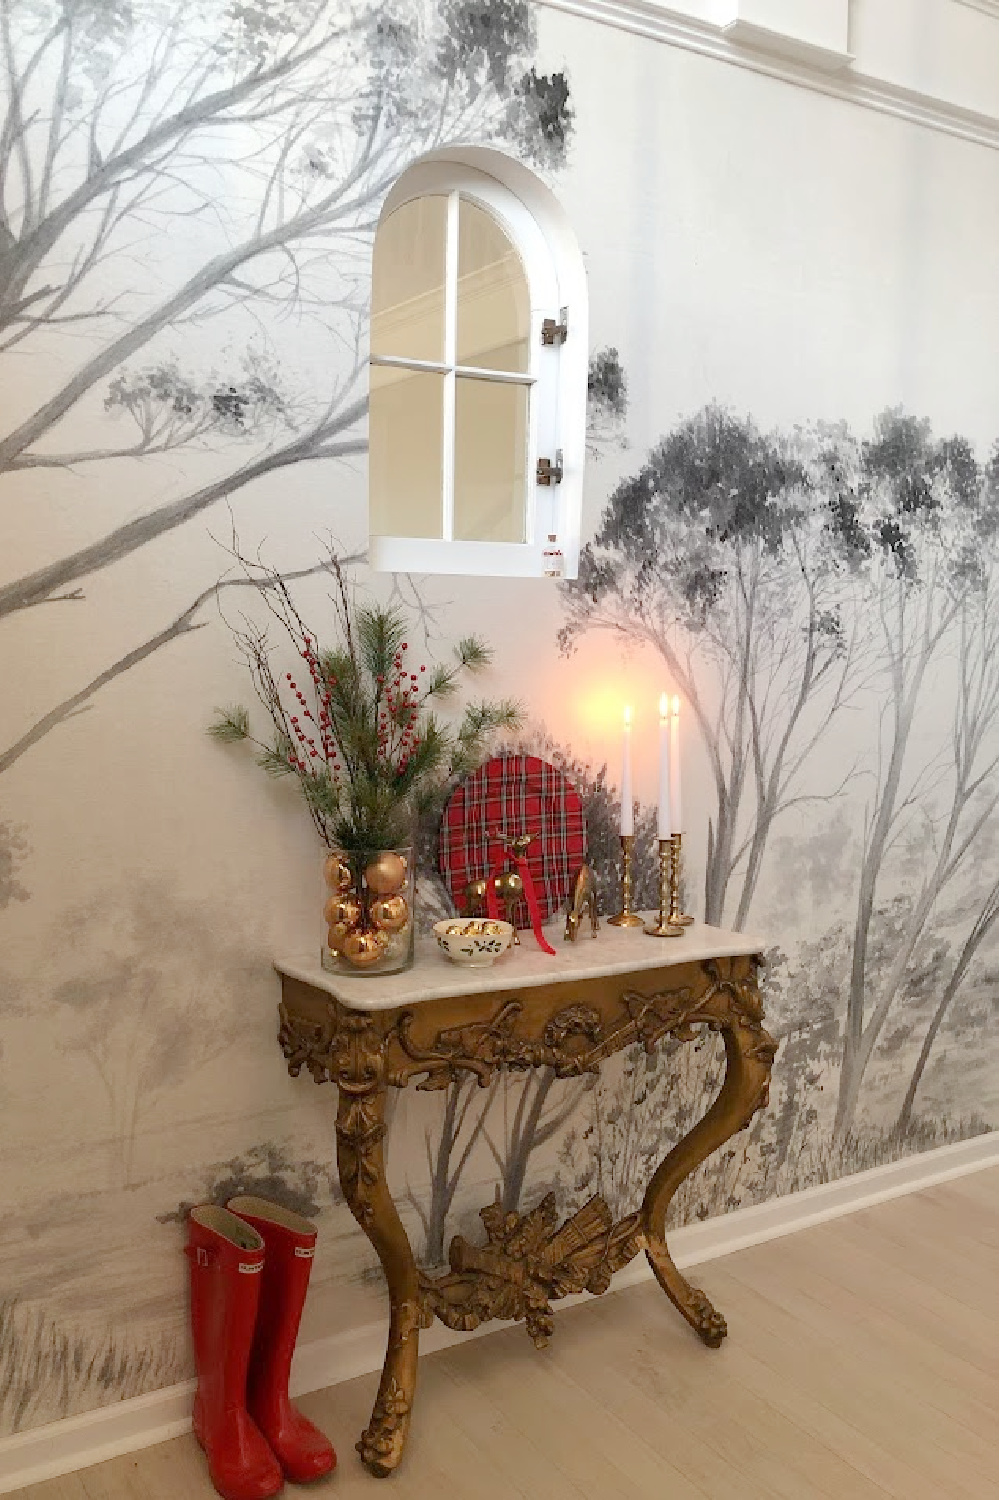 Tree wallpaper mural and French console table decorated for holidays in our Georgian home's entry - Hello Lovely Studio.